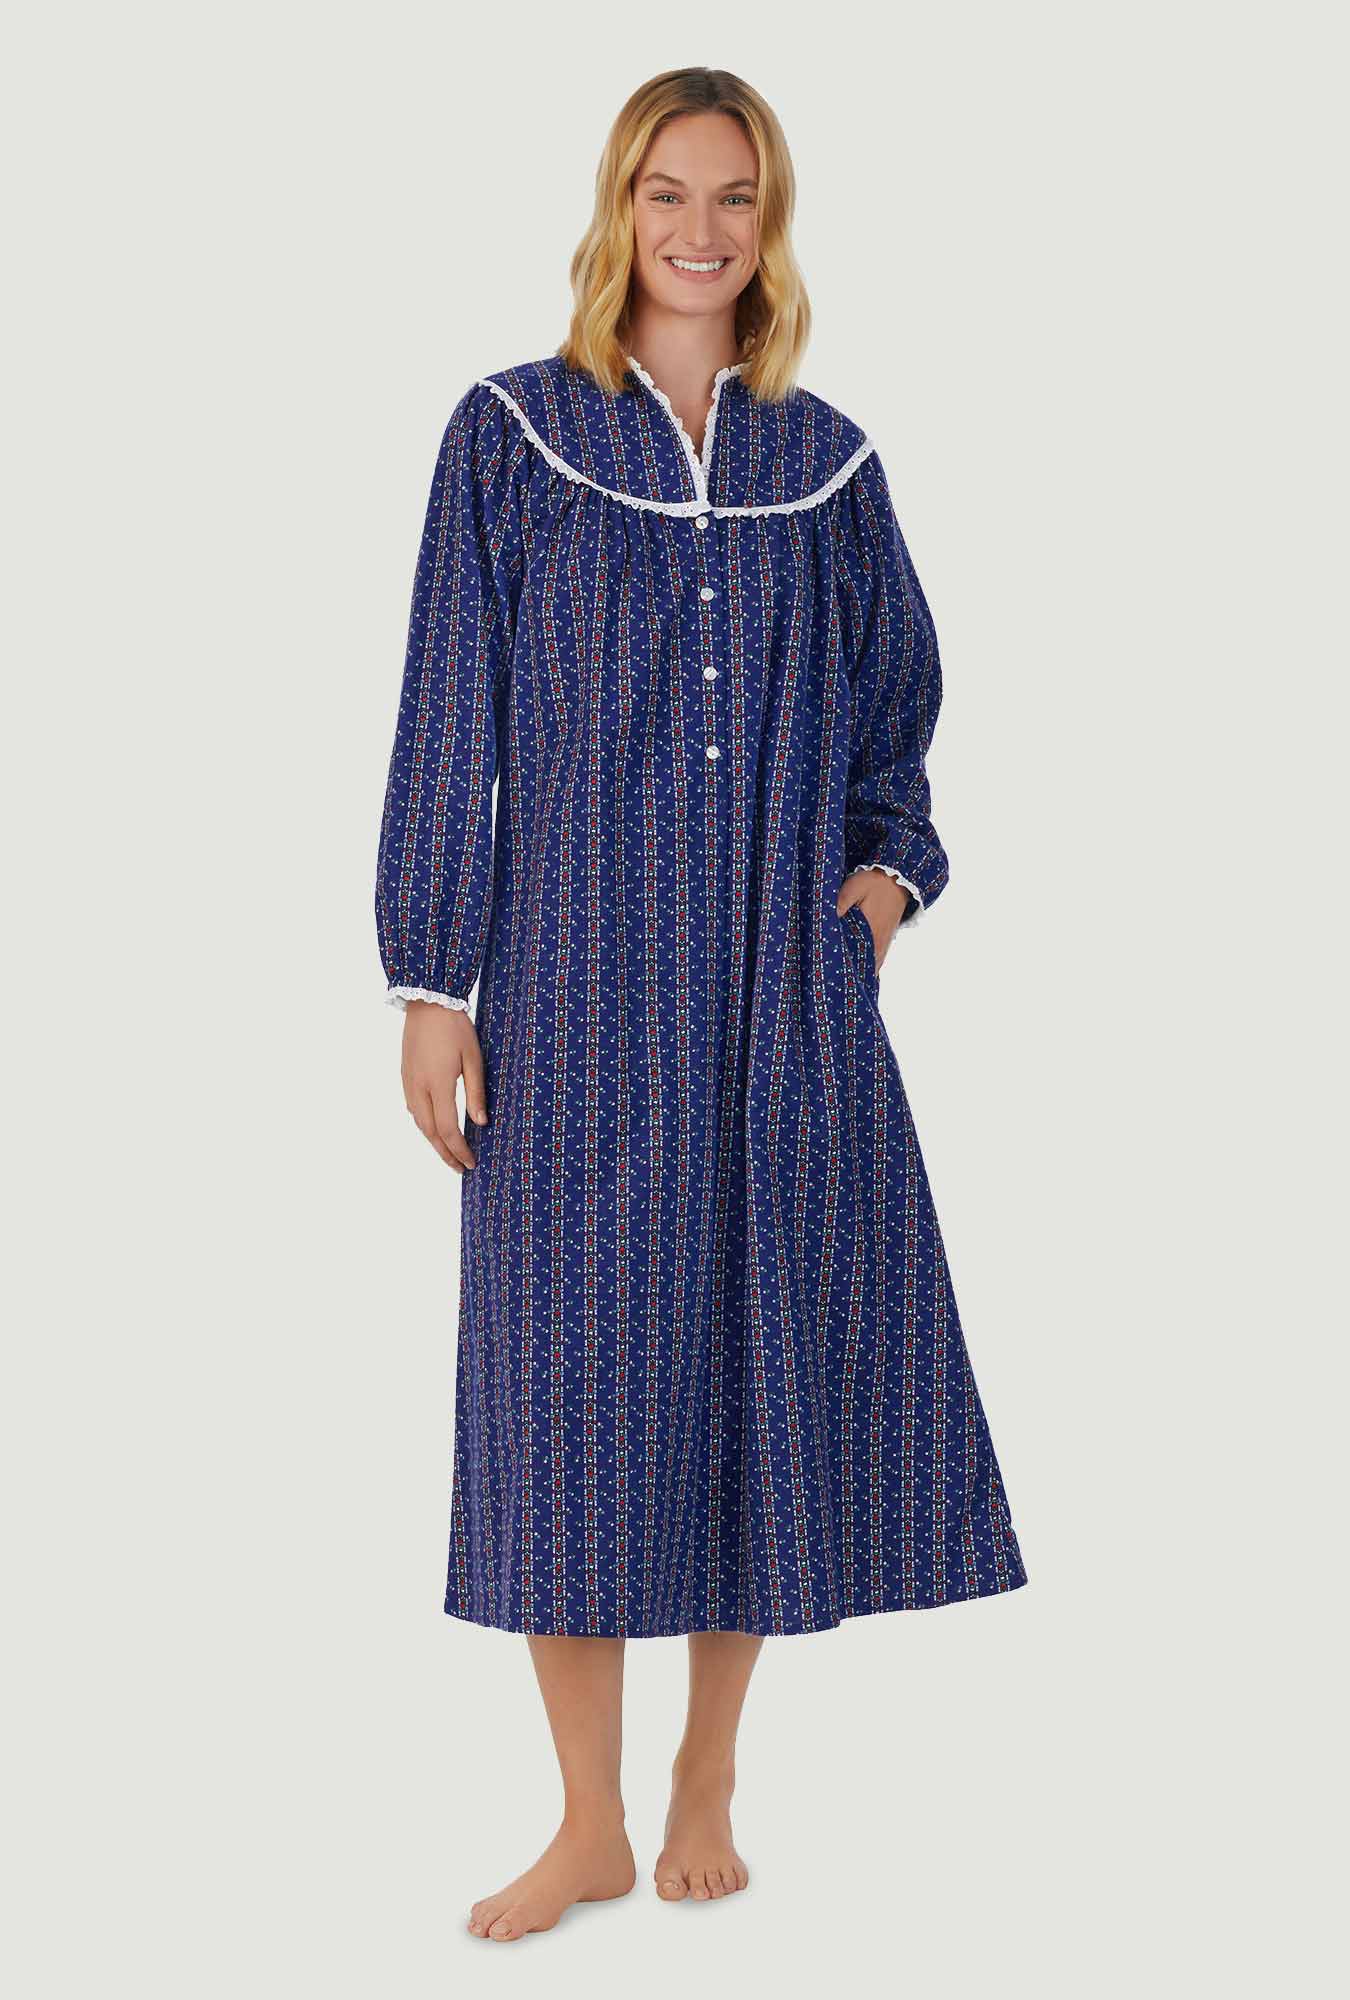 Lanz of Salzburg  Traditional Flannel Nightgowns and Pajamas